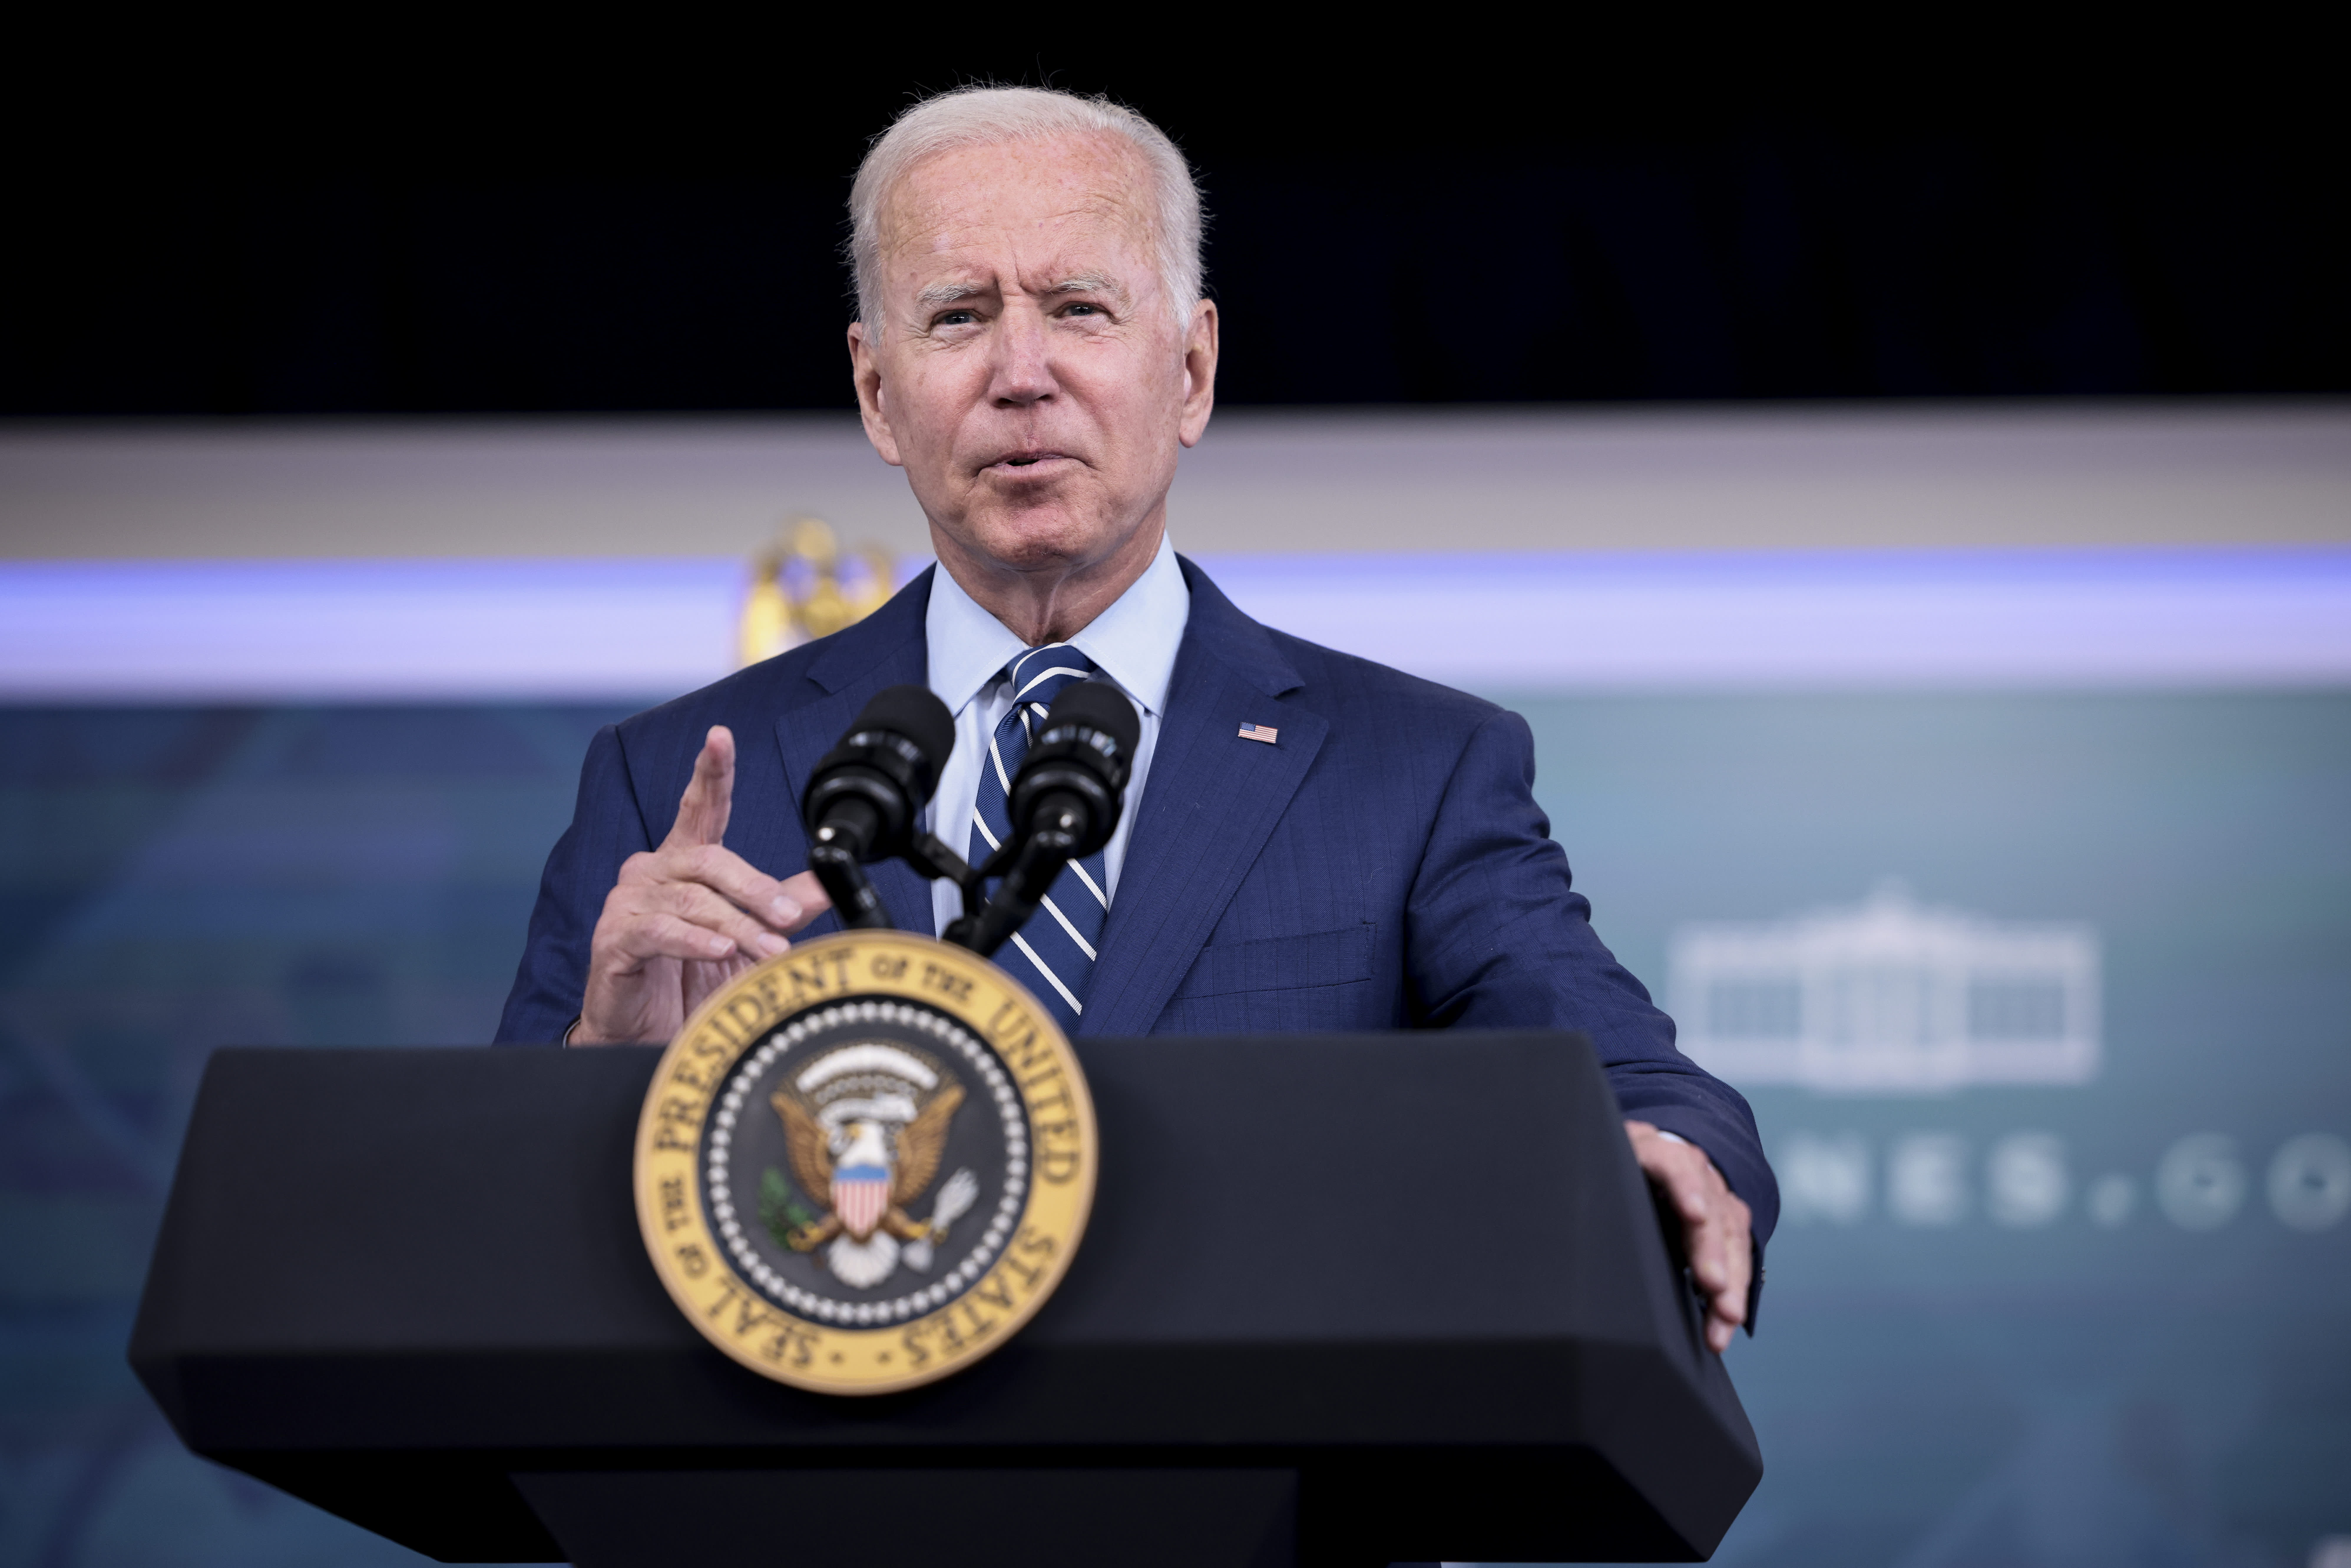 Markér følsomhed evaluerbare How Biden's economic plan compares to the Great Society and New Deal